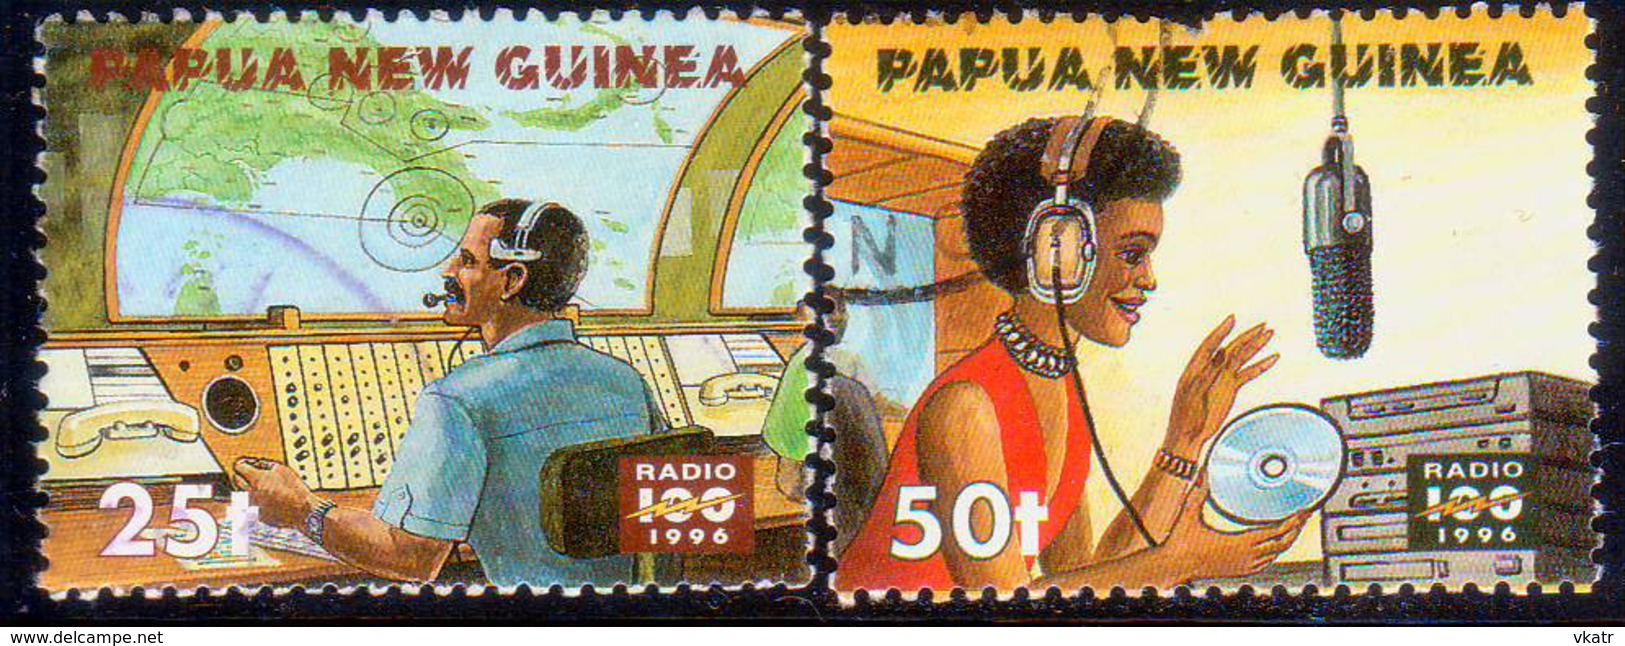 PAPUA NEW GUINEA 1996 SG #789-90 Part Set Two Stamps Of Four (50t Is Faulted At Top) Used Centenary Of Radio - Papua New Guinea